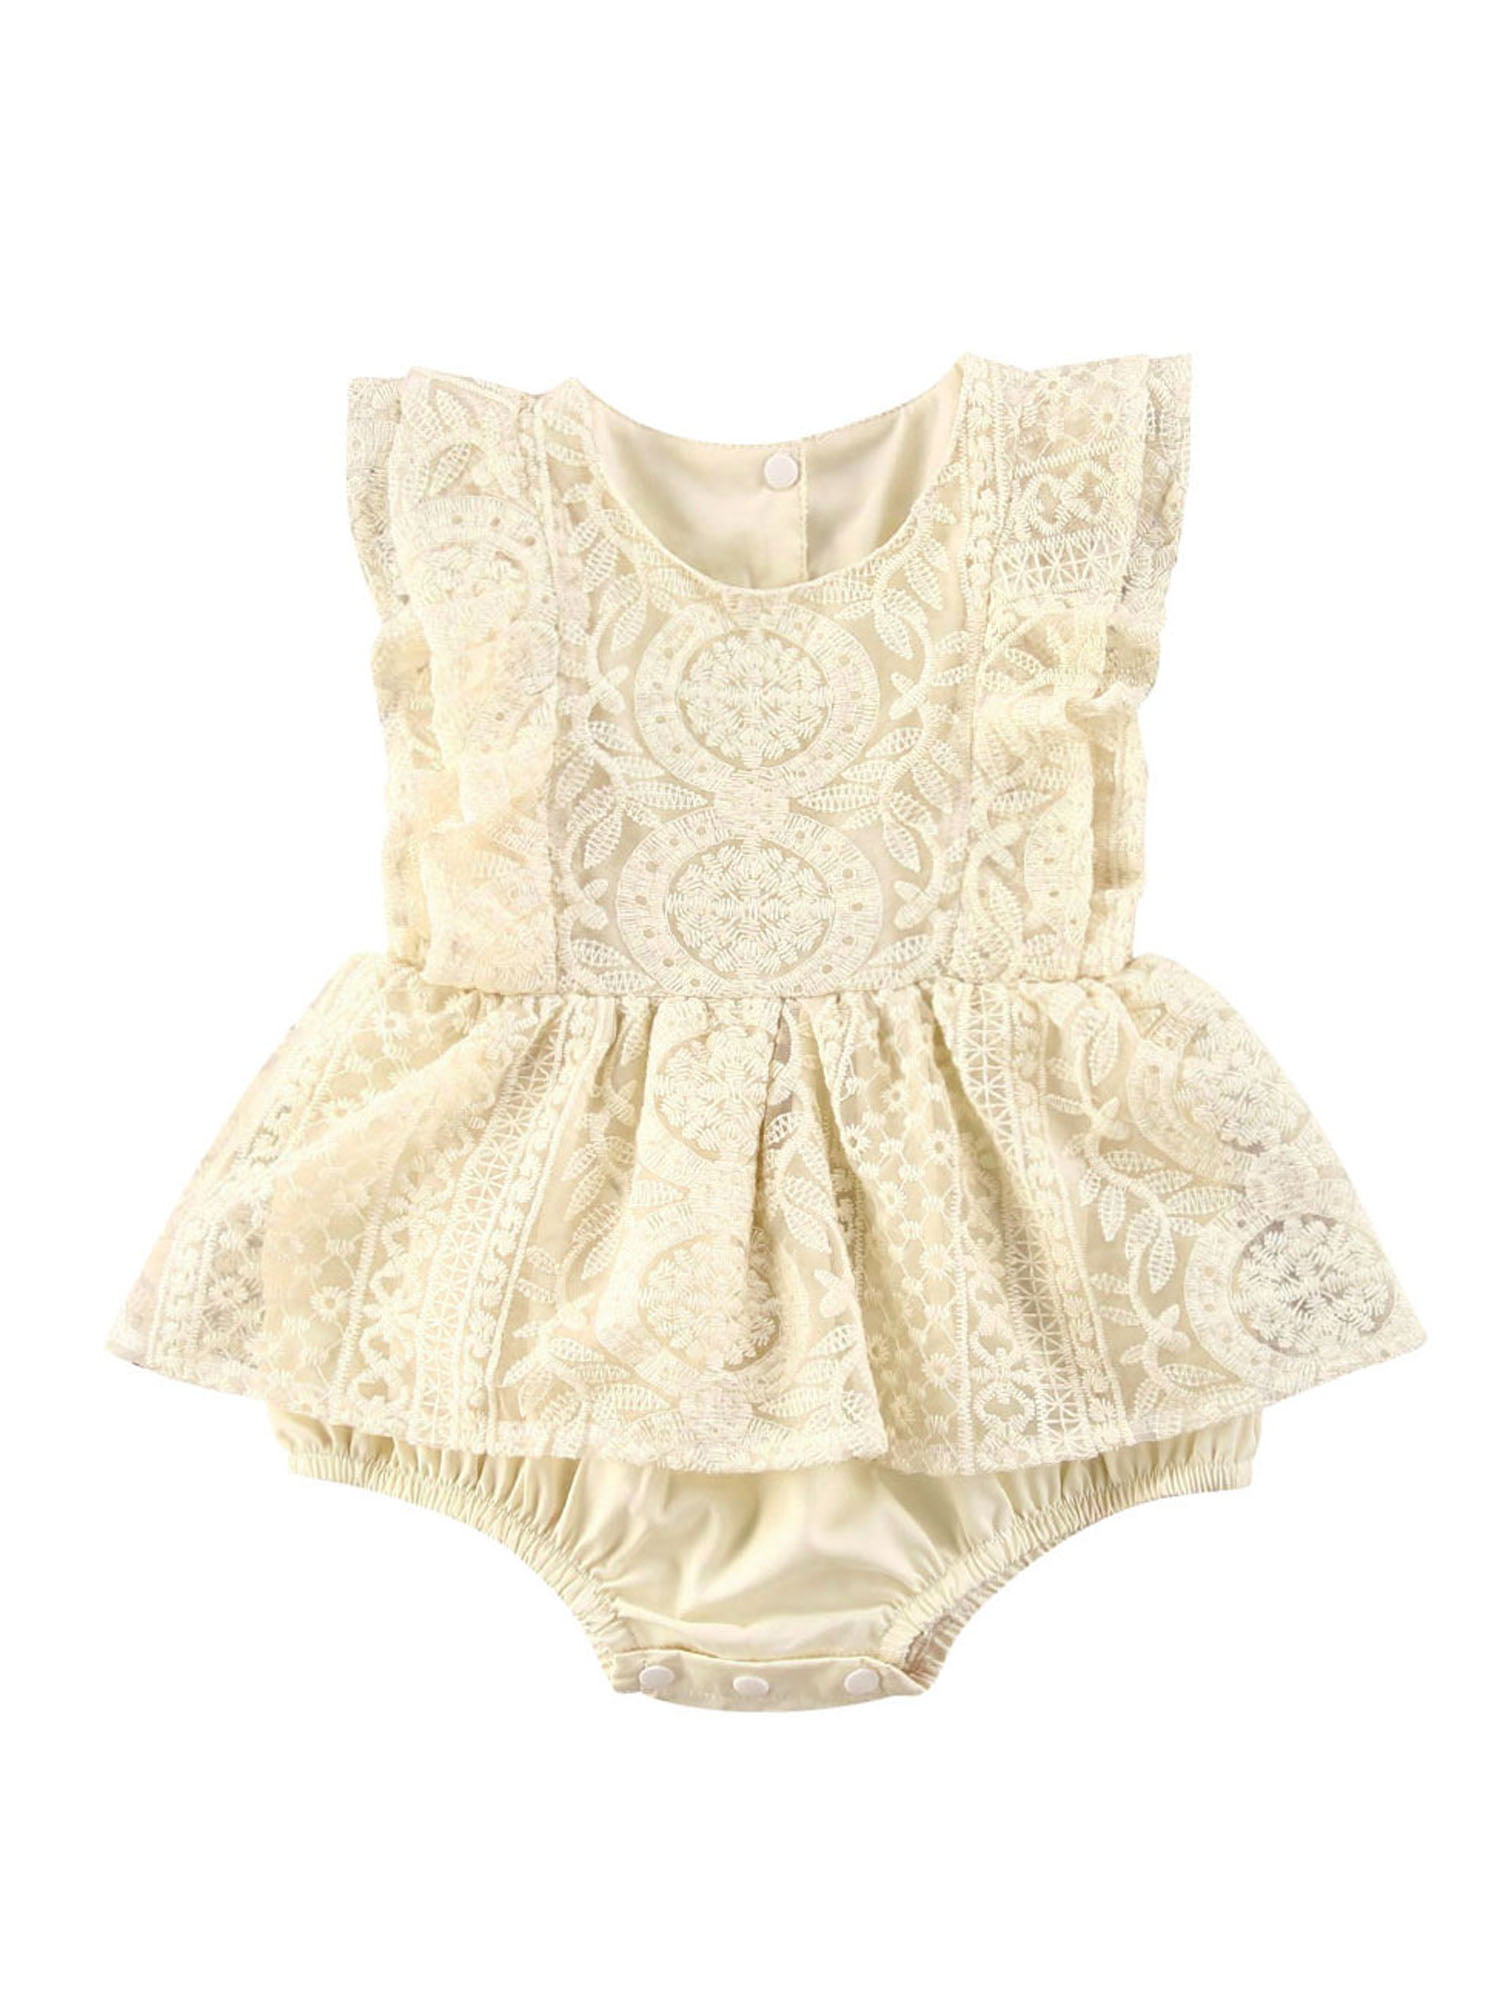 Newborn Infant Baby Girl Lace Sleeveless Solid Romper Jumpsuit Clothes 